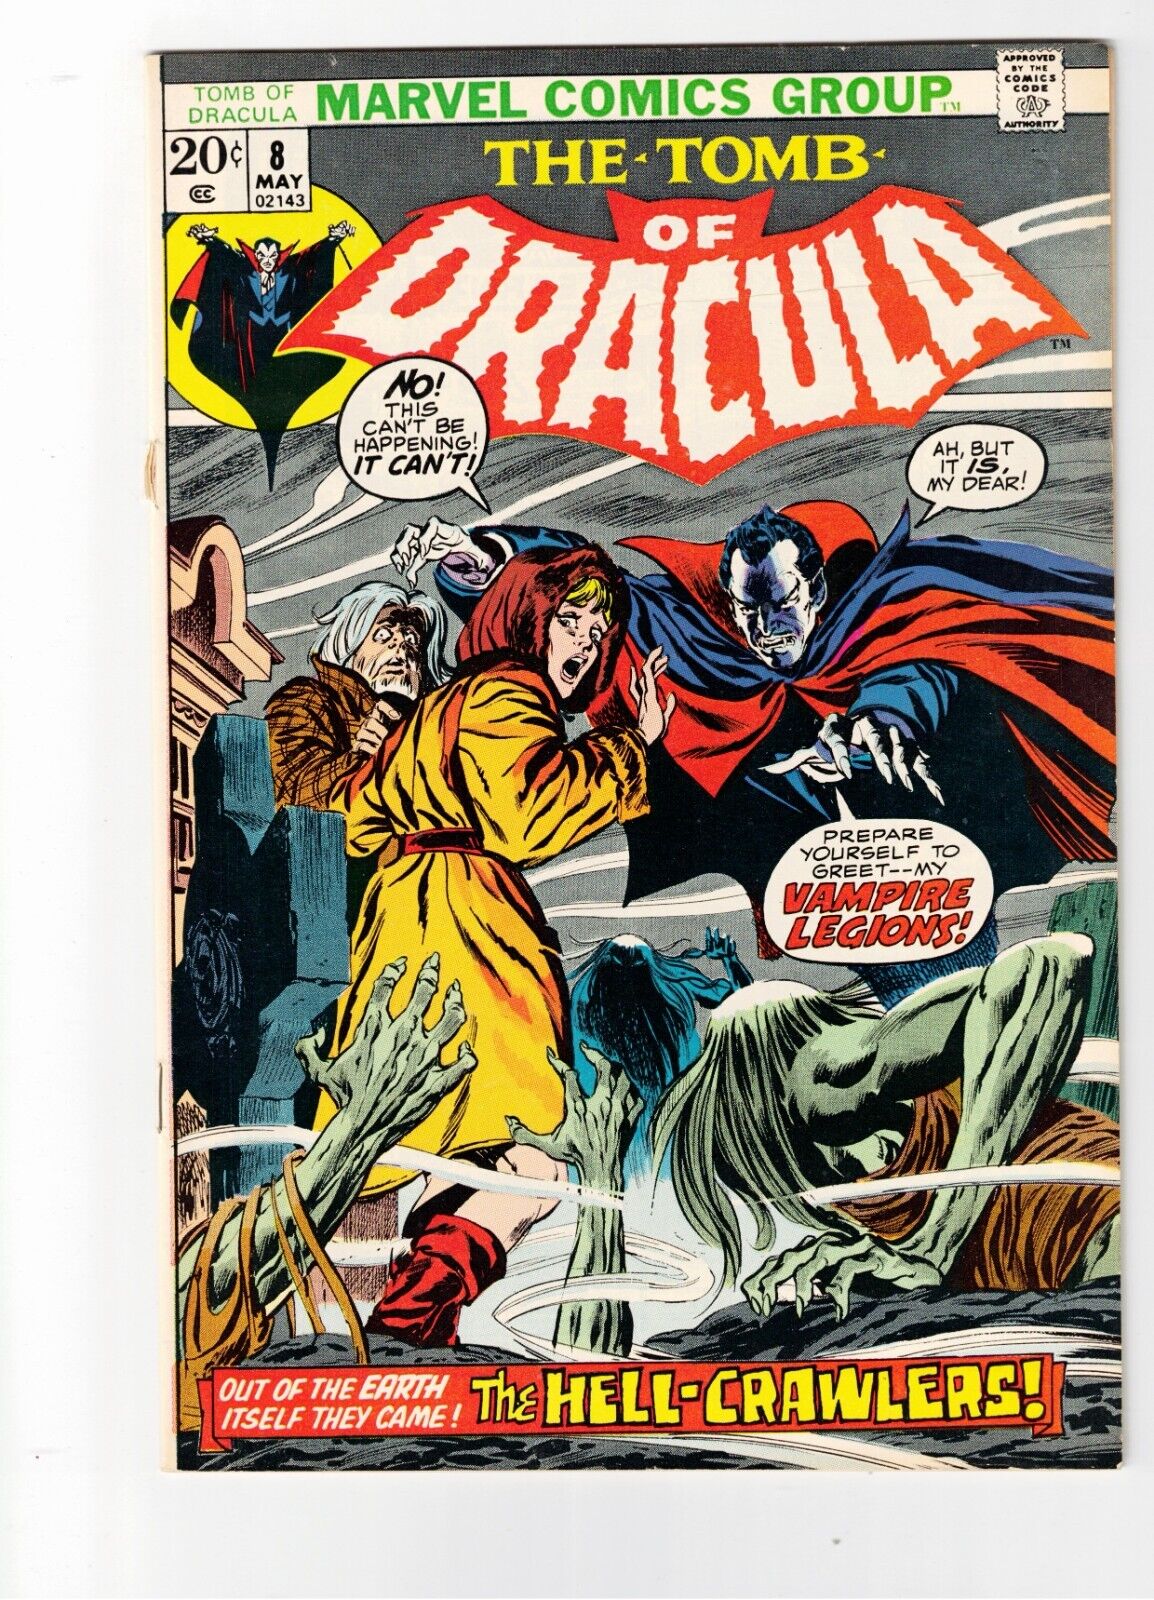 The Tomb of Dracula #8 May 1973, Marvel